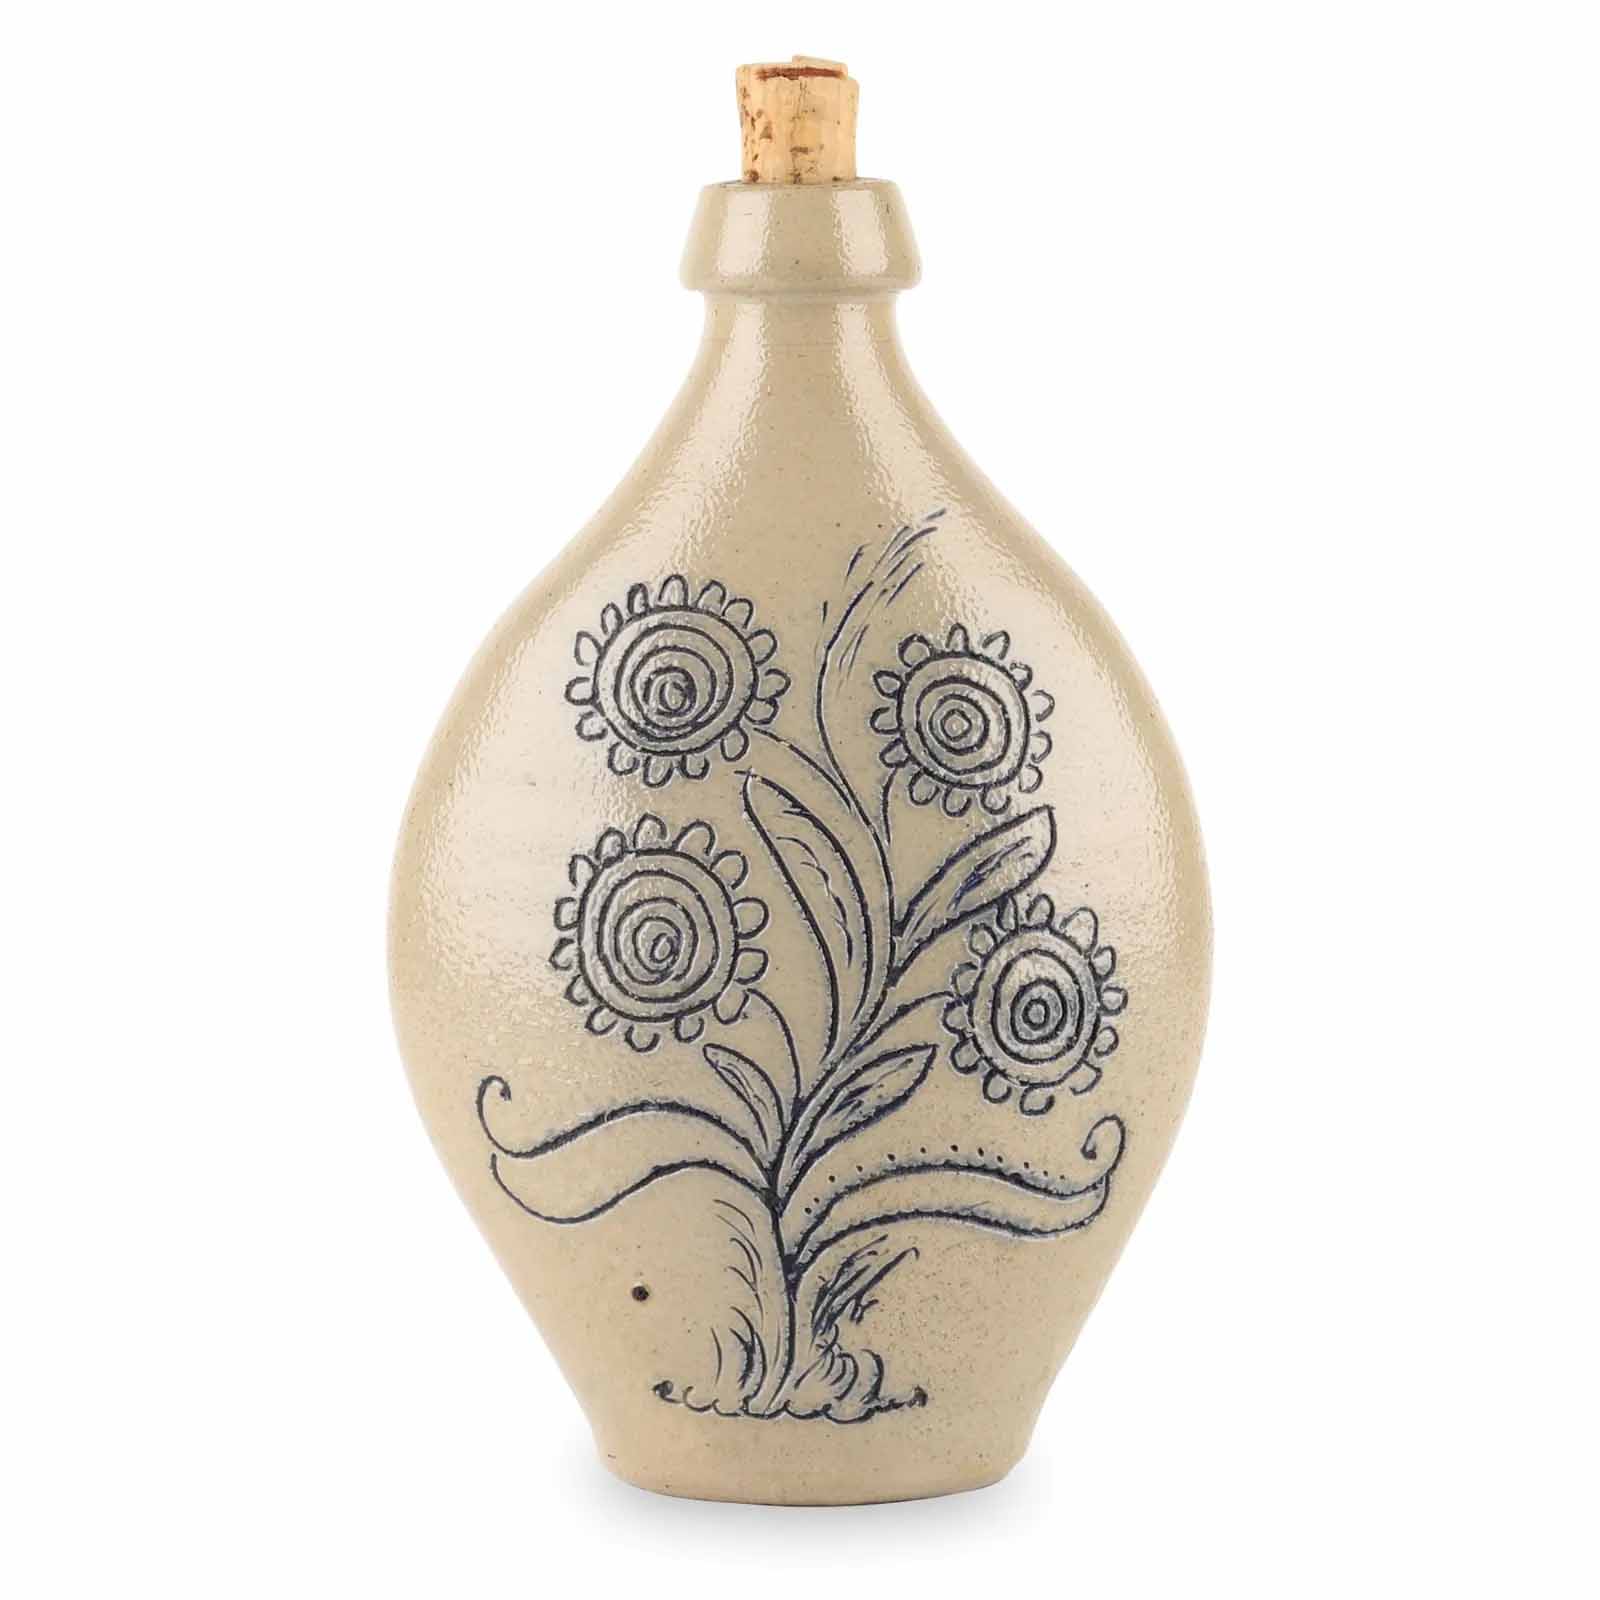 19th-century stoneware flask tops Miller &#038; Miller&#8217;s Canadiana auction Oct. 7